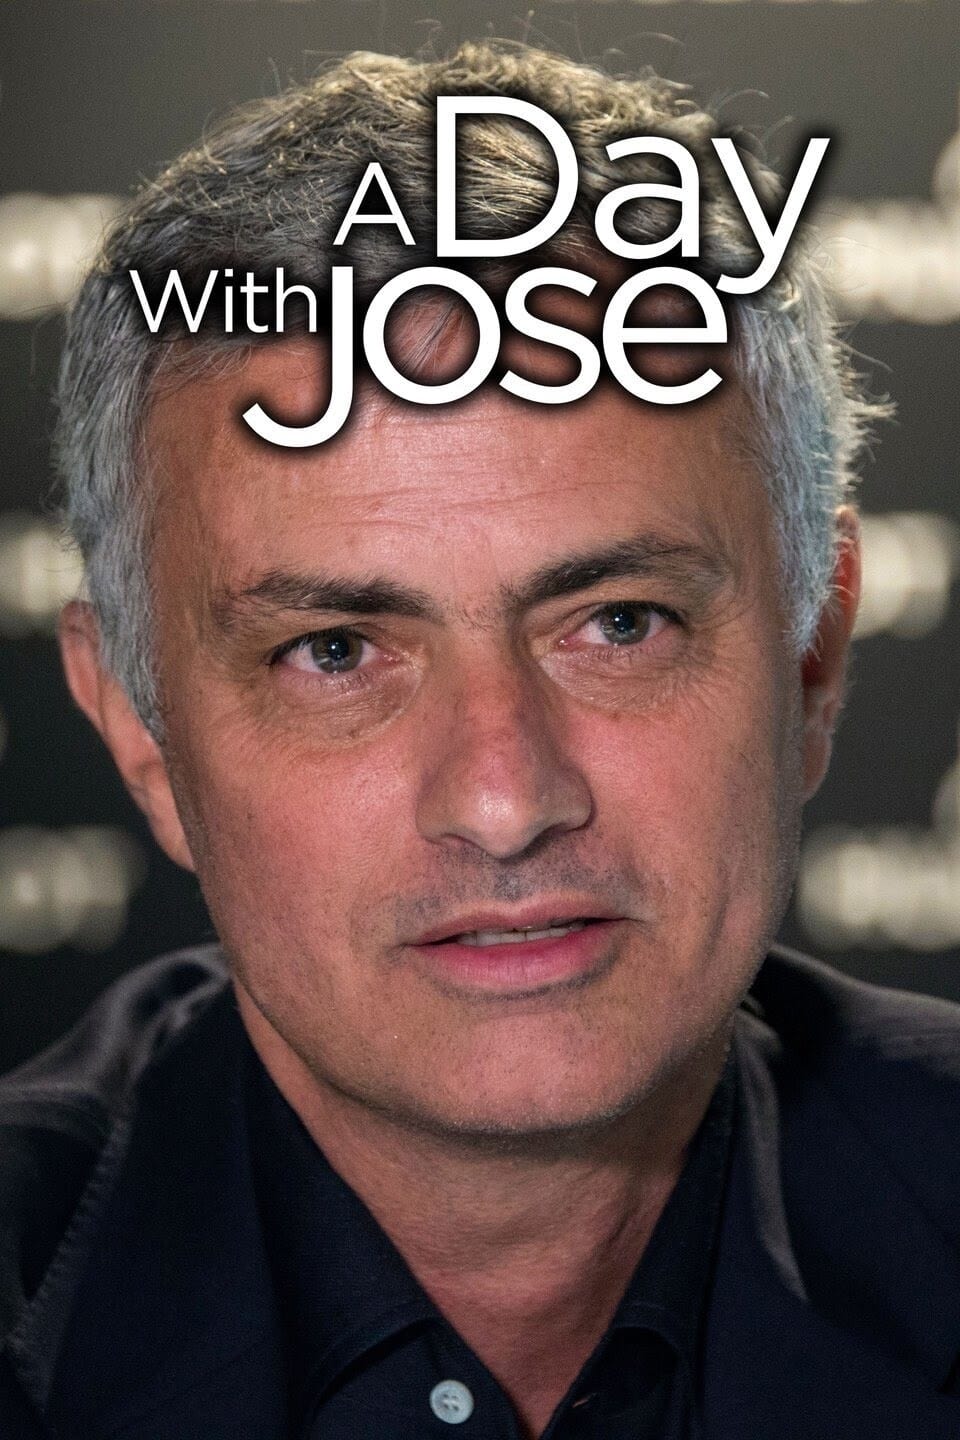 A Day with Jose